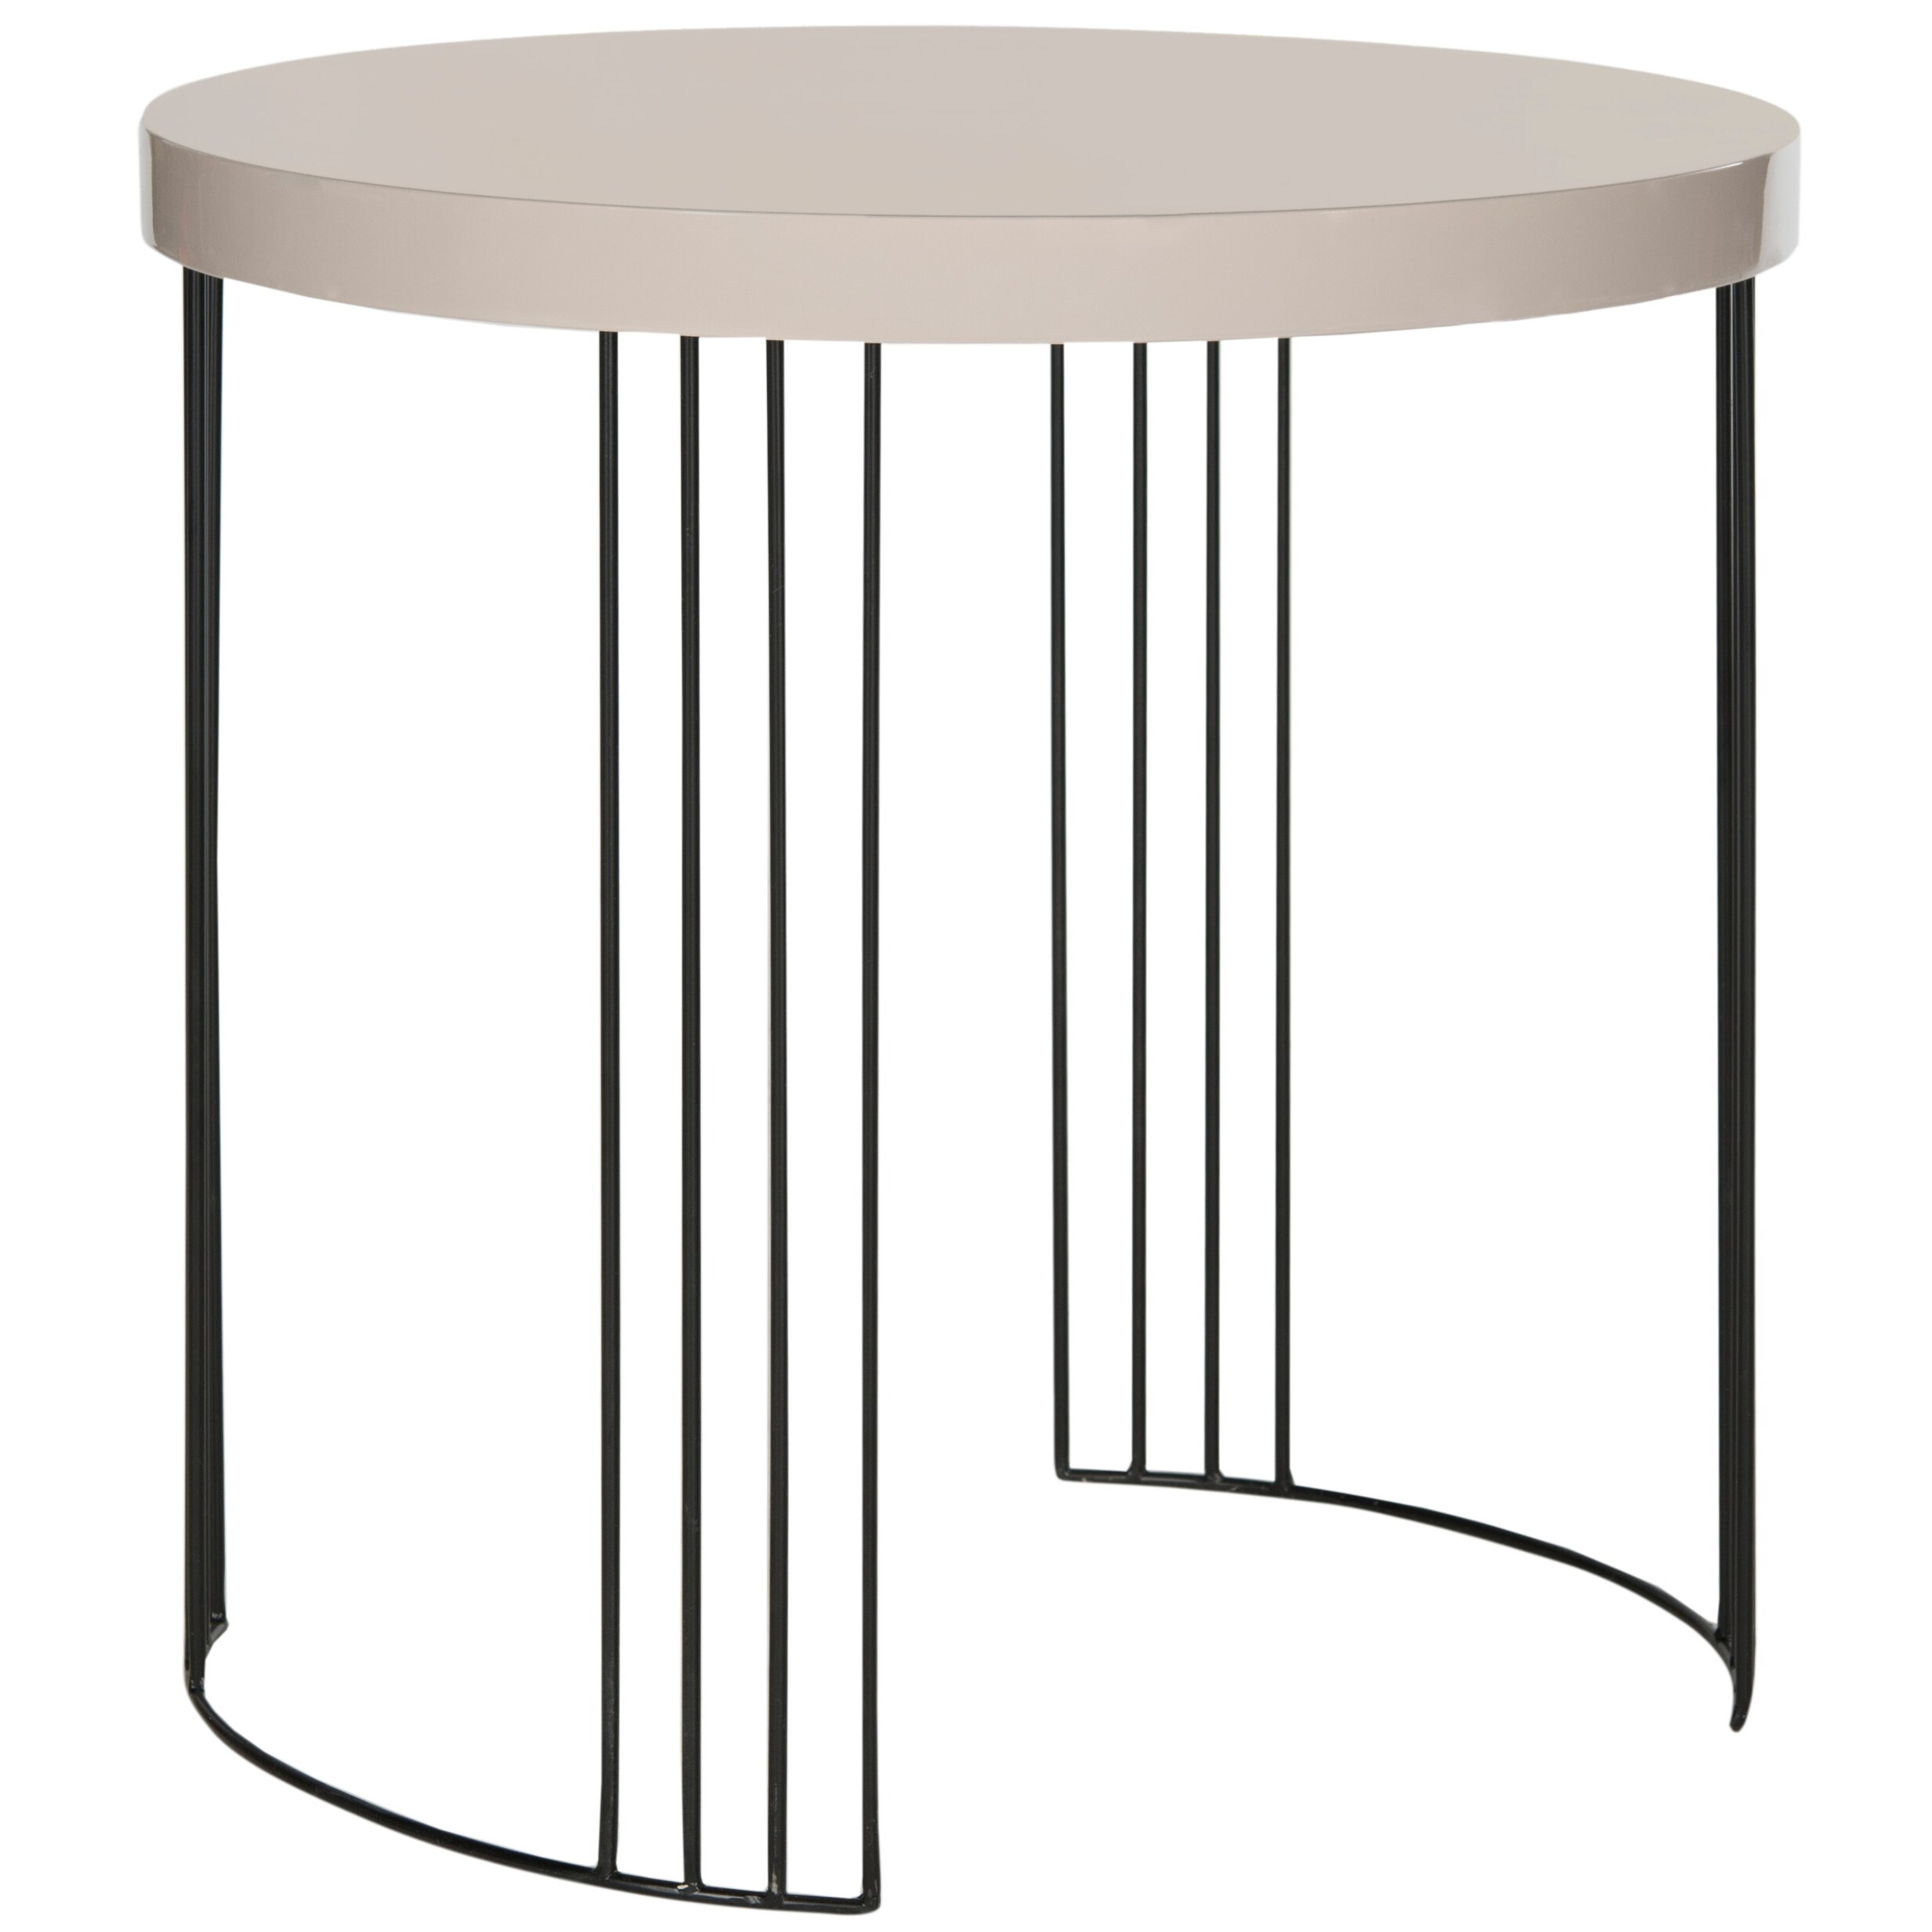 SAFAVIEH Mid-Century Modern Kelly Taupe/ Black Lacquer Side Table - 21.6" x 21.6" x 21.6"